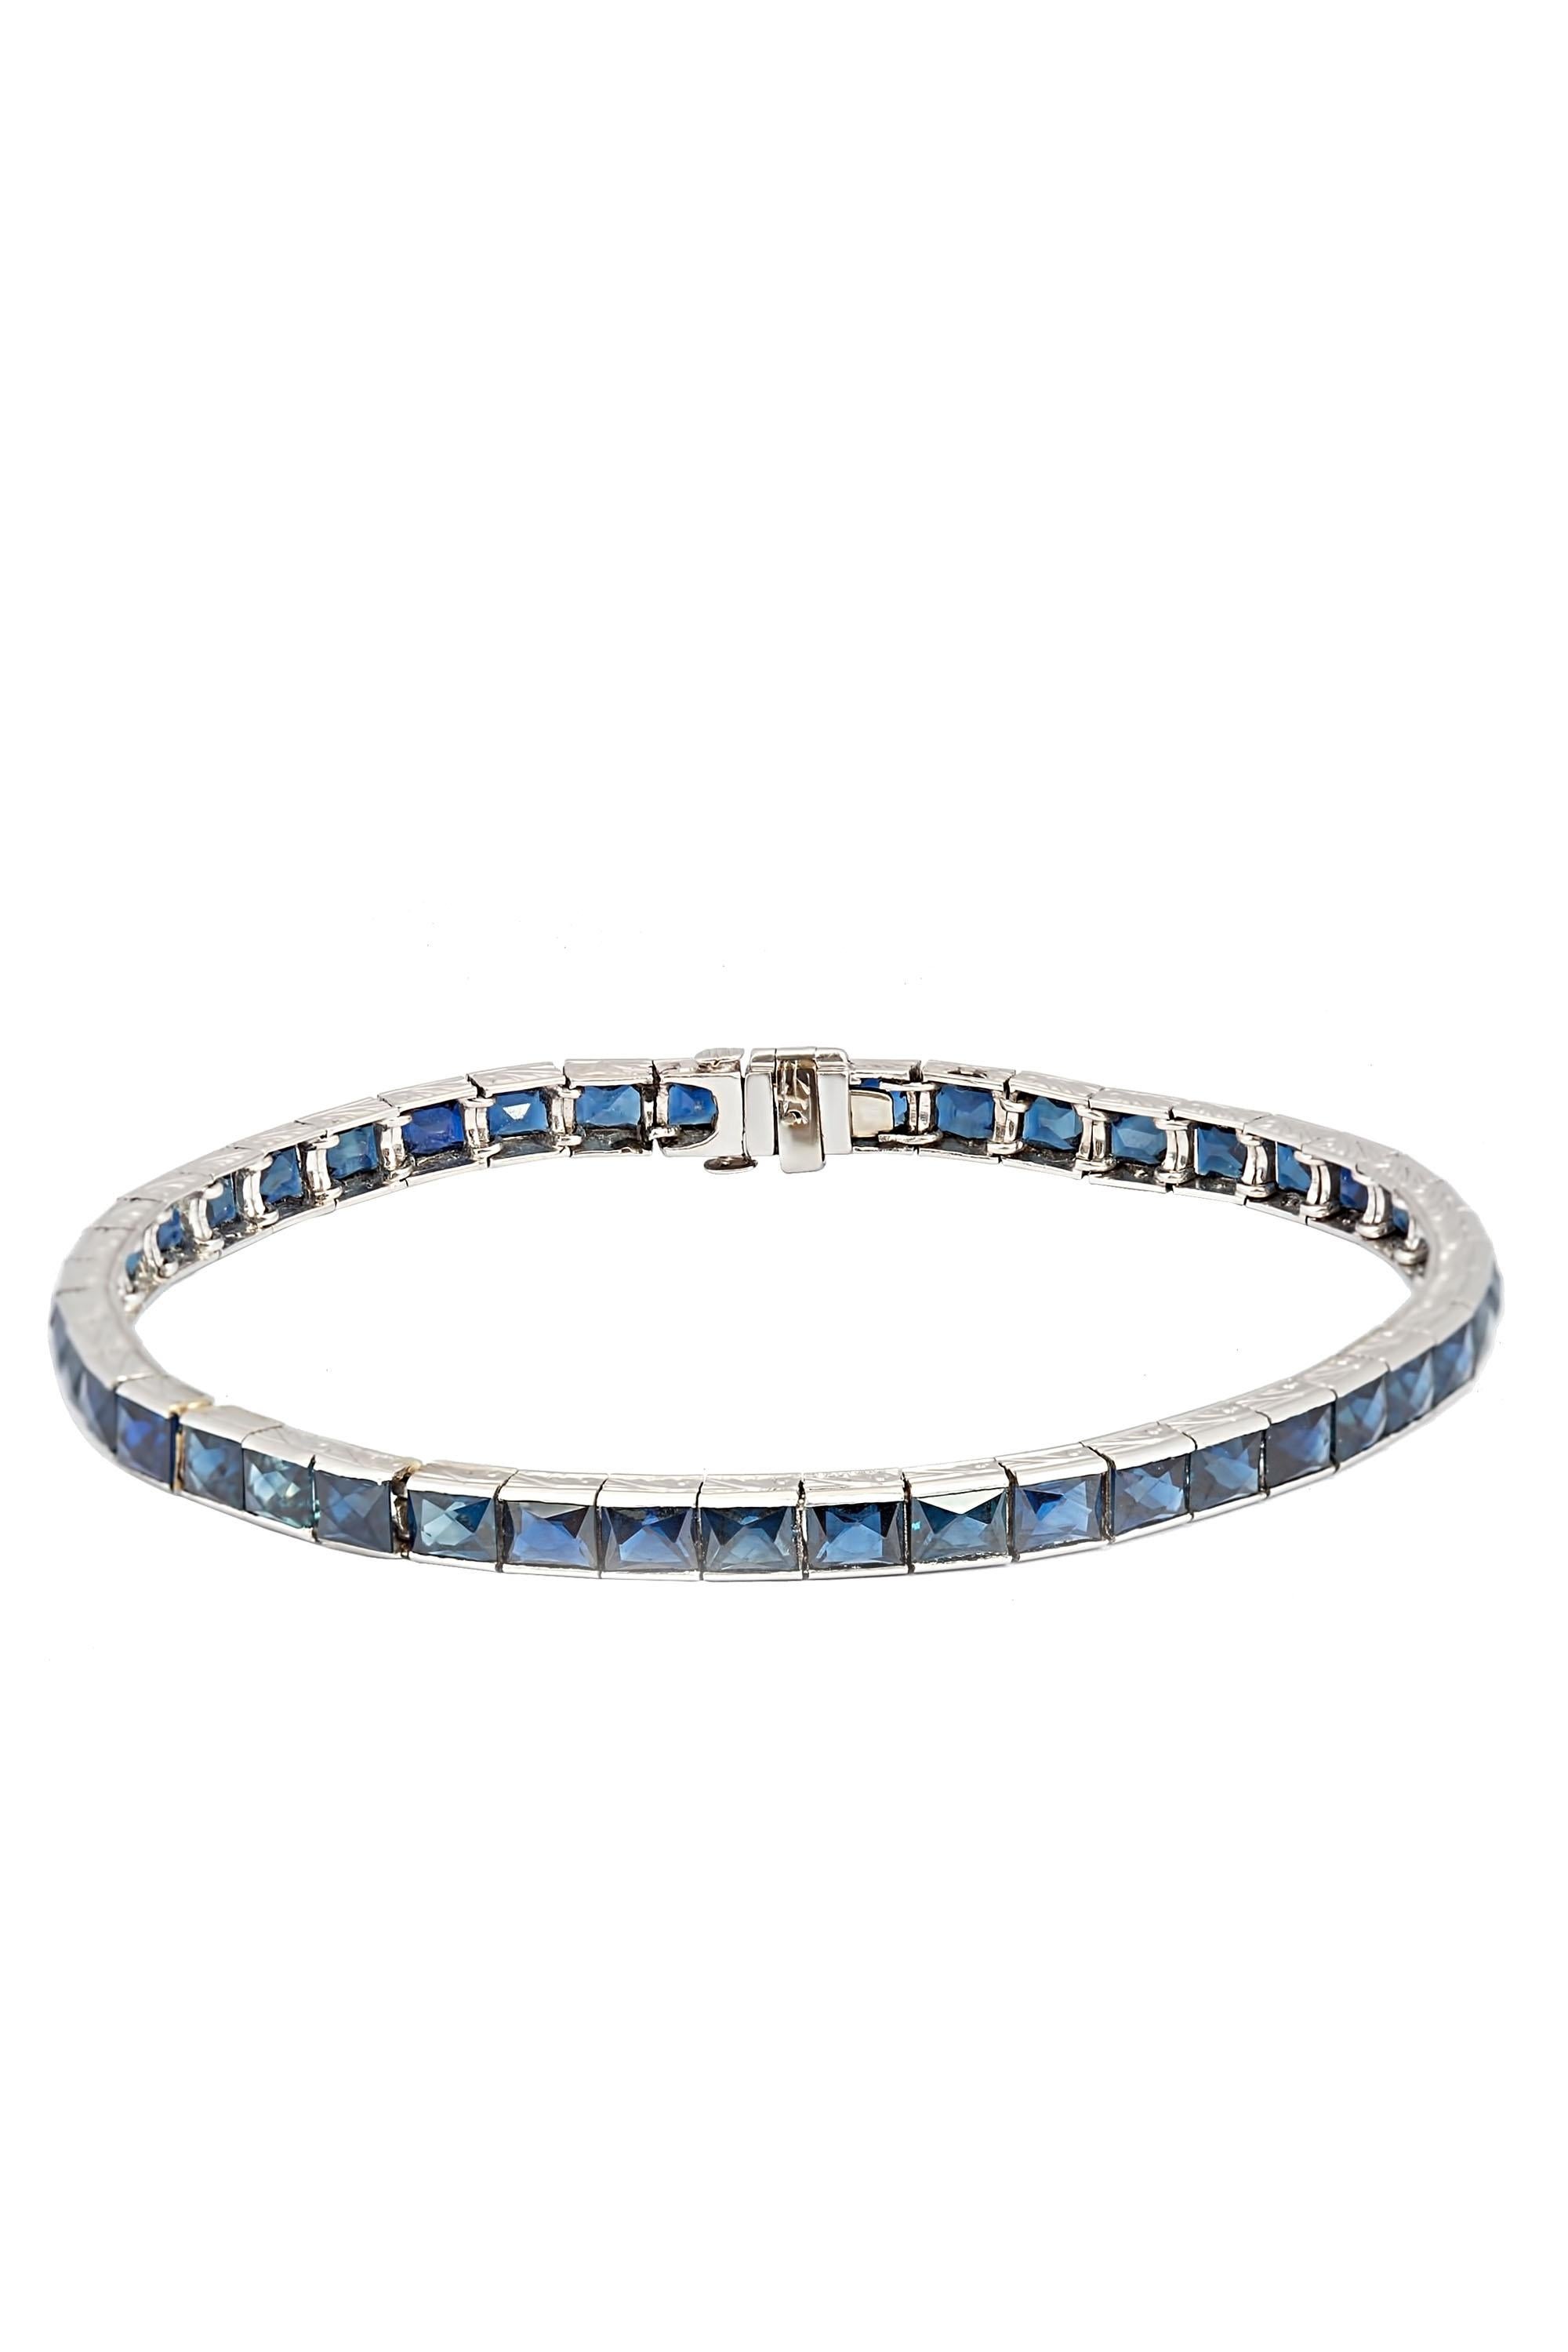 Art Deco 14.50 Carat Sapphire Line Bracelet In Good Condition For Sale In beverly hills, CA